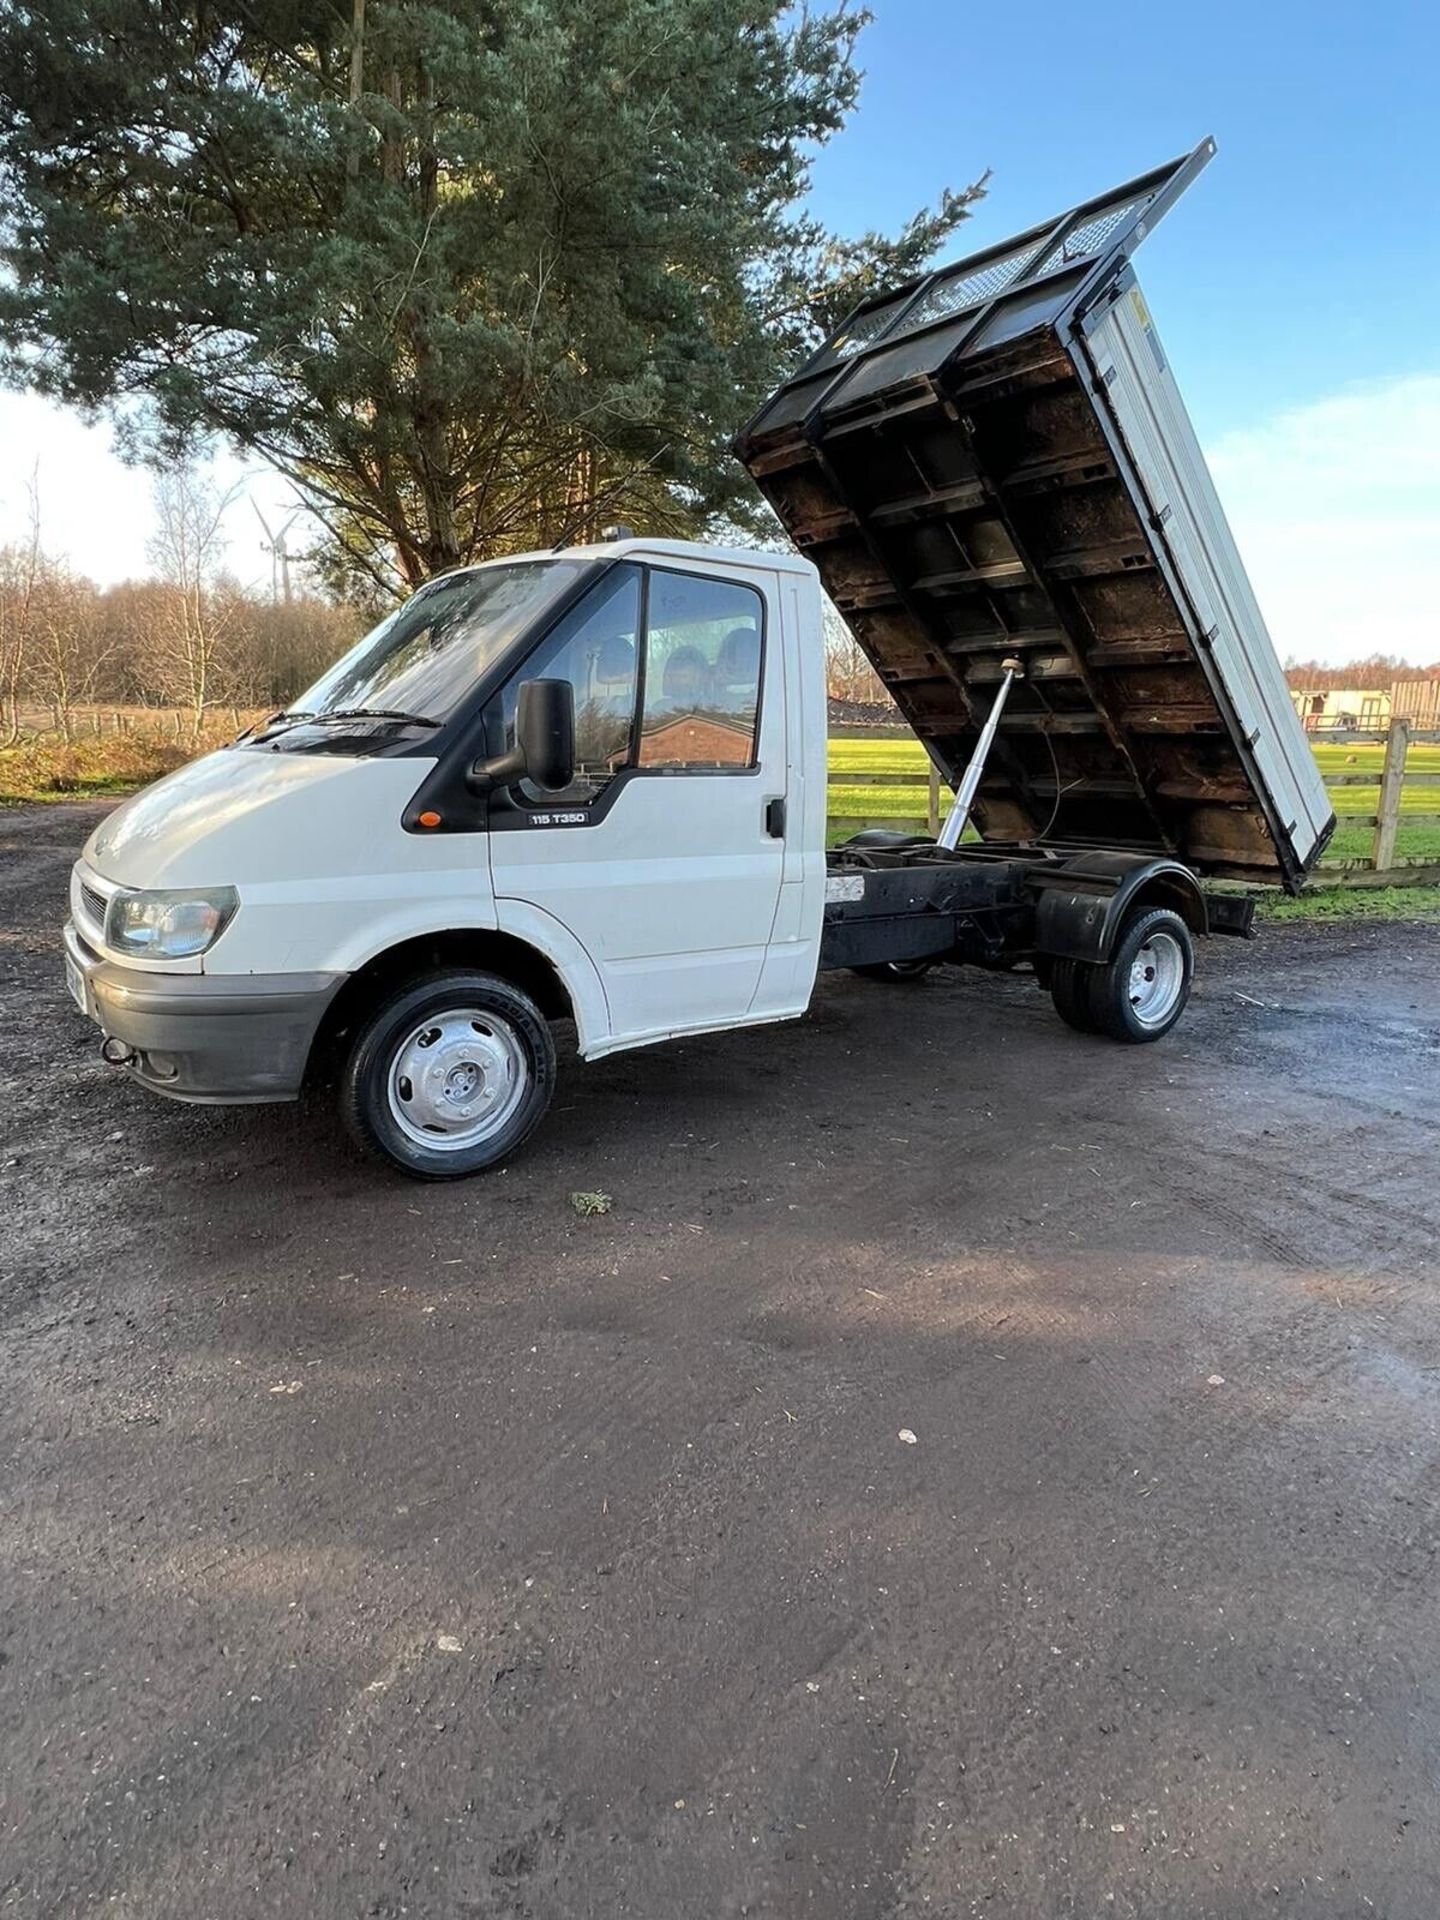 FORD TRANSIT TIPPER LORRY TWIN WHEEL TIPPING TRUCK LONG TEST MANUAL 120K 2006 - Image 10 of 12